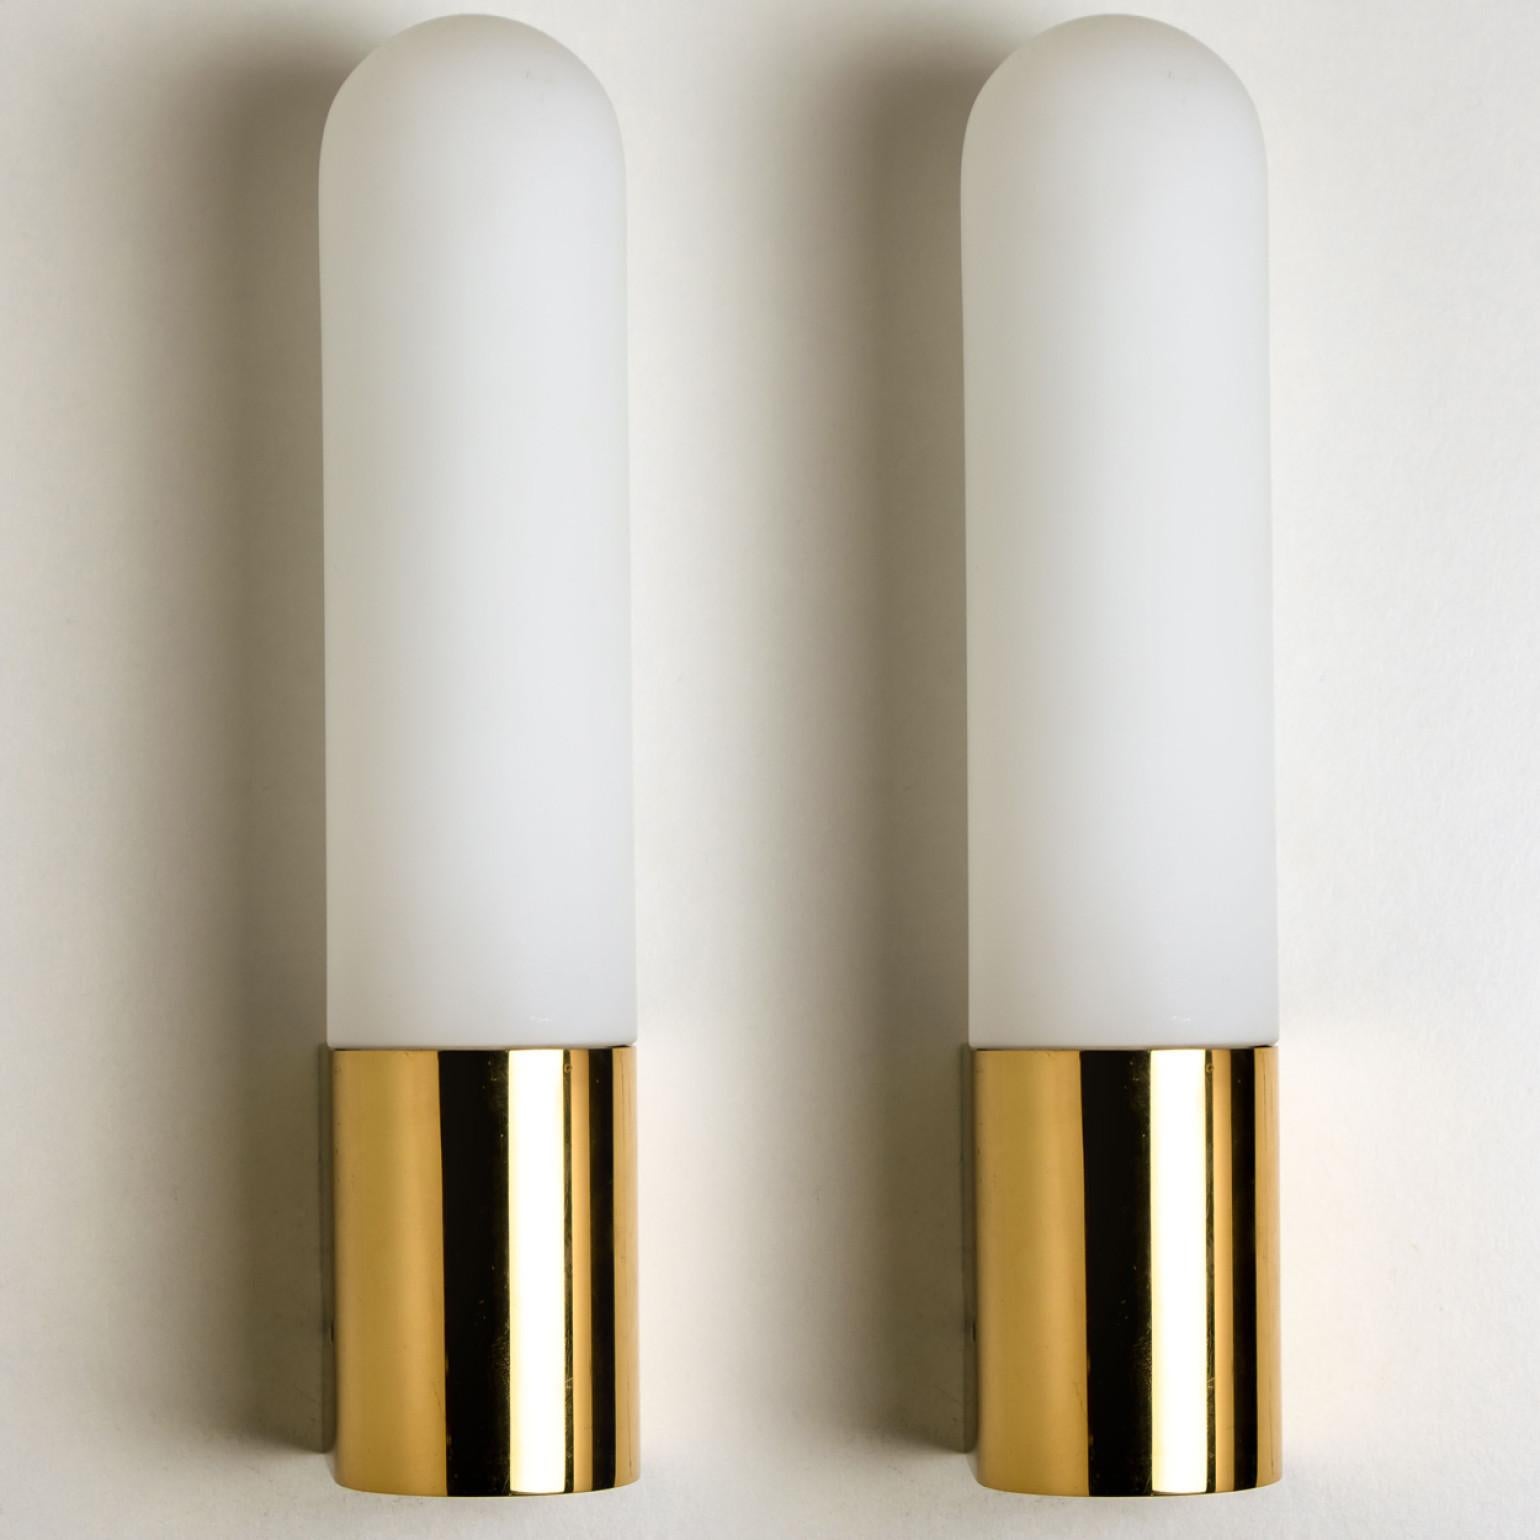 Several Opaque Glass / Brass Wall Lights by Limburg, Germany, 1970s For Sale 6